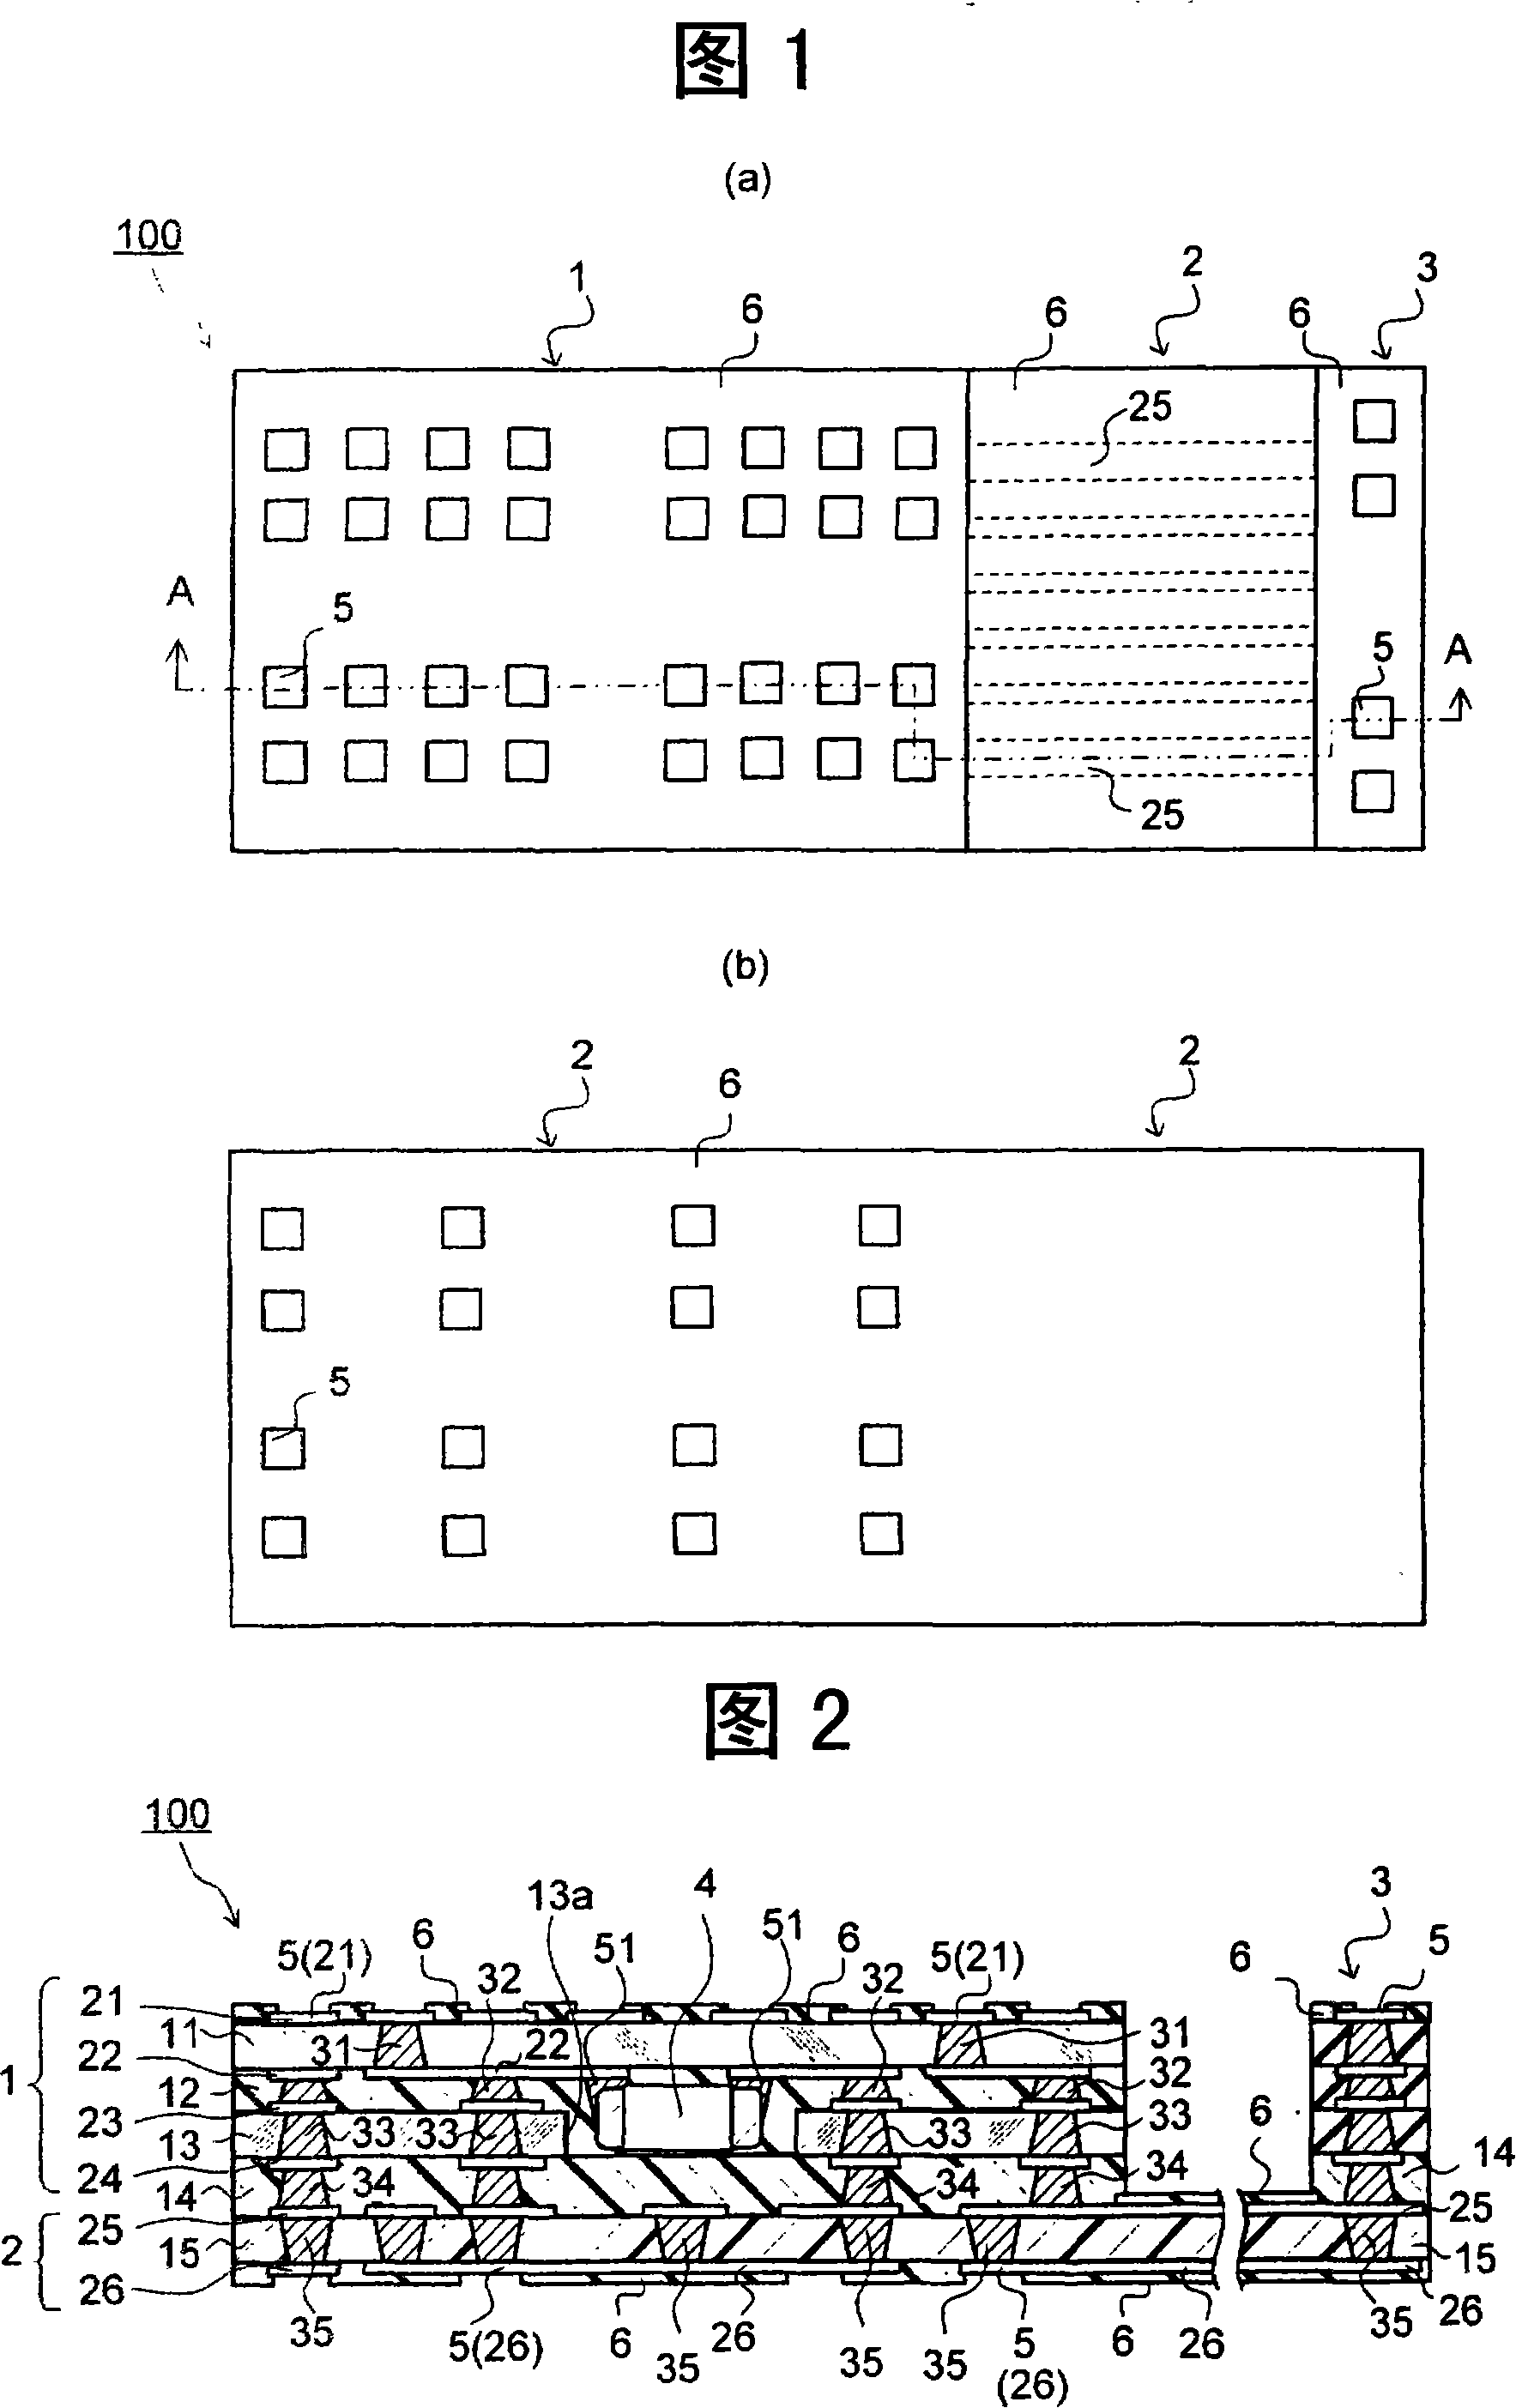 Multilayered printed wiring board and method for manufacturing the same